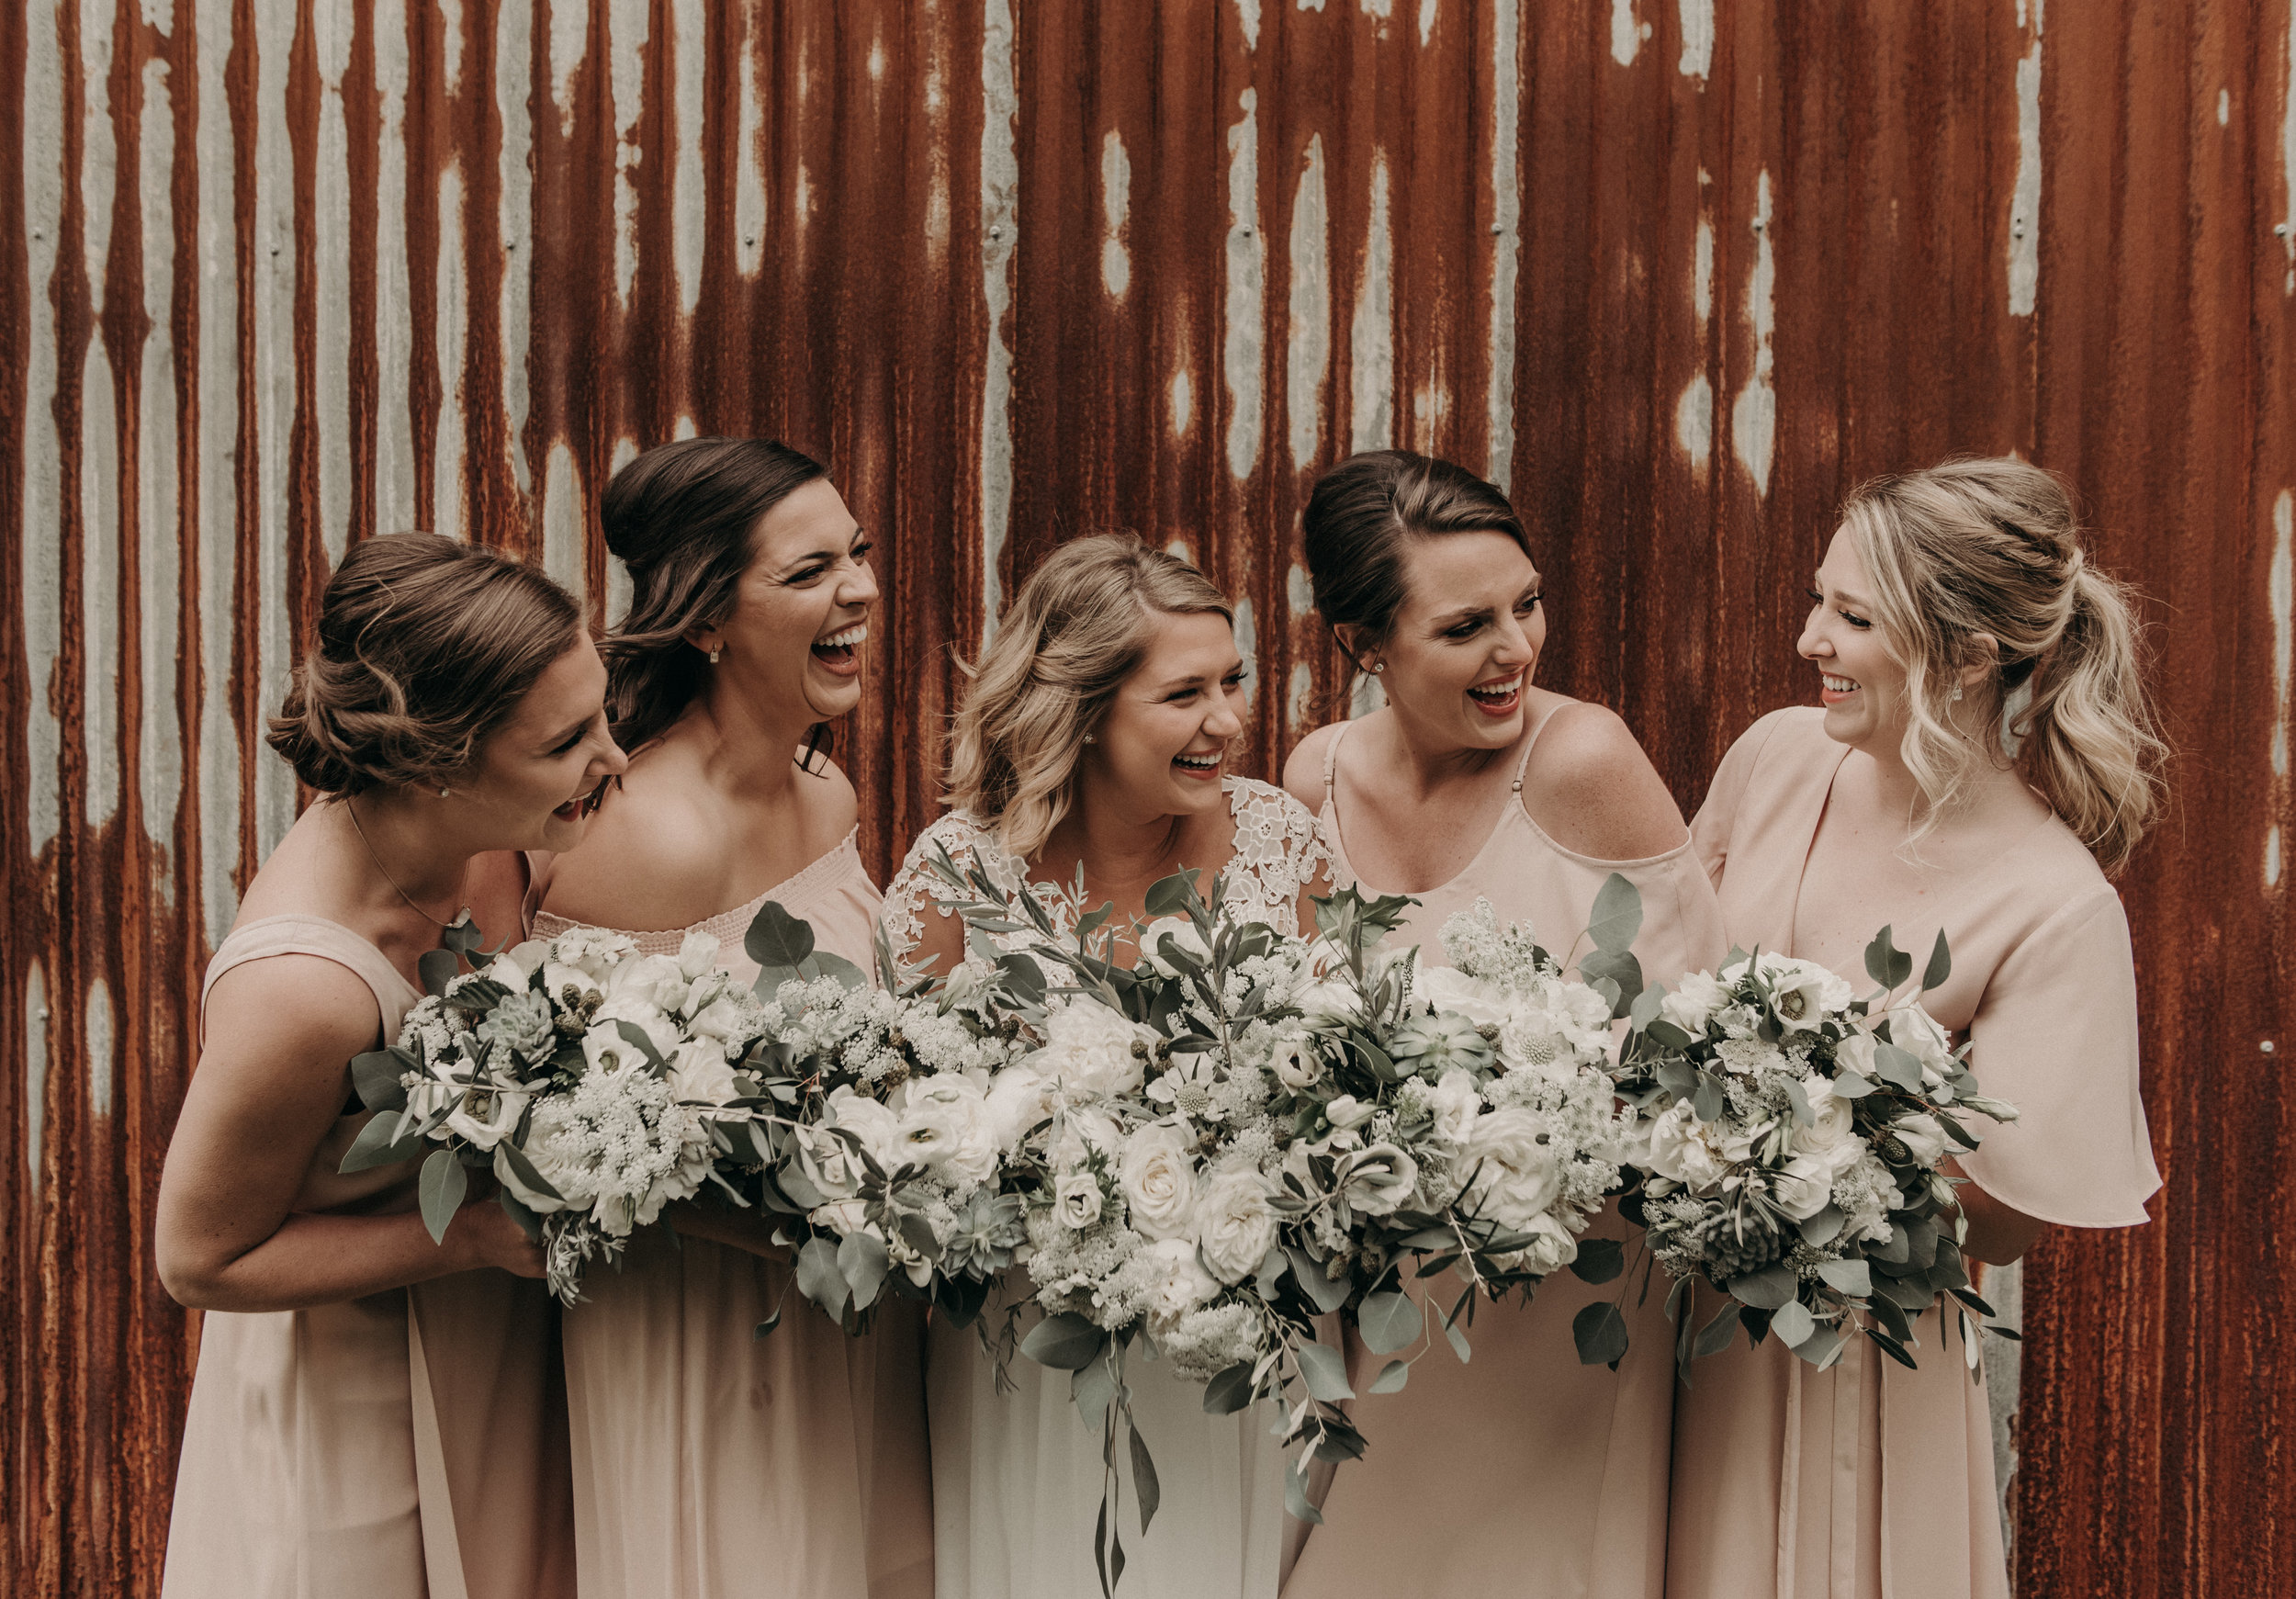  Bohemian style, wildflower inspired bridal and bridesmaid bouquets with white garden roses, eucalyptus, anemone, ranunculus at The Creek Haus. Petal Pushers floral event design studio located in Dripping Springs, Texas. 